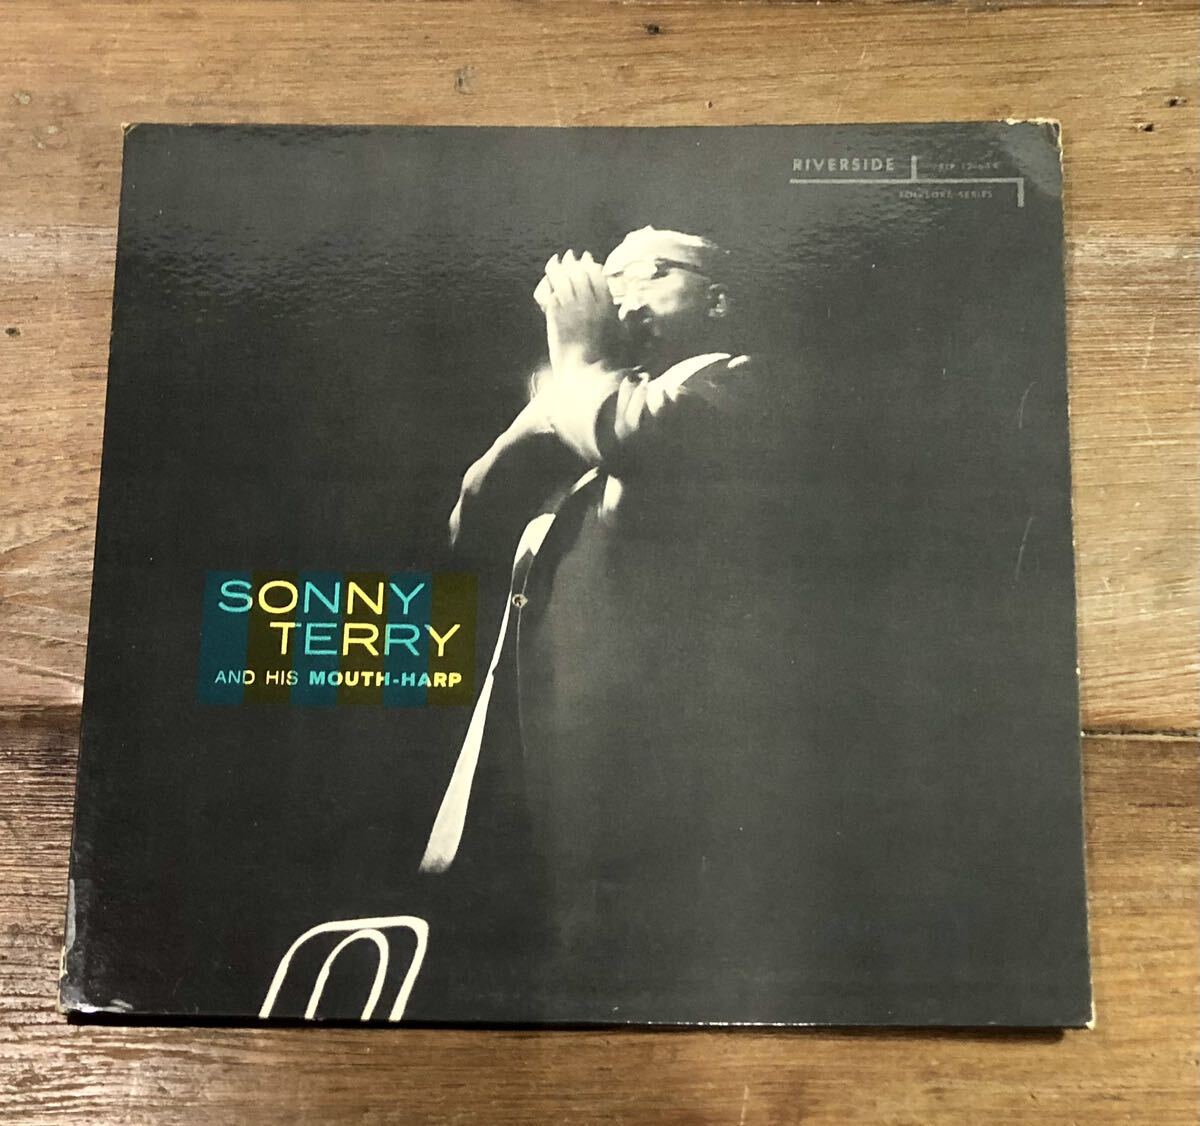 【 SONNY TERRY AND HIS MOUTH HARP 】 サニー・テリー / 1957年,59年 ,US盤,RLP12-644 RIVERSIDE RECORDS / USED保管品の画像1